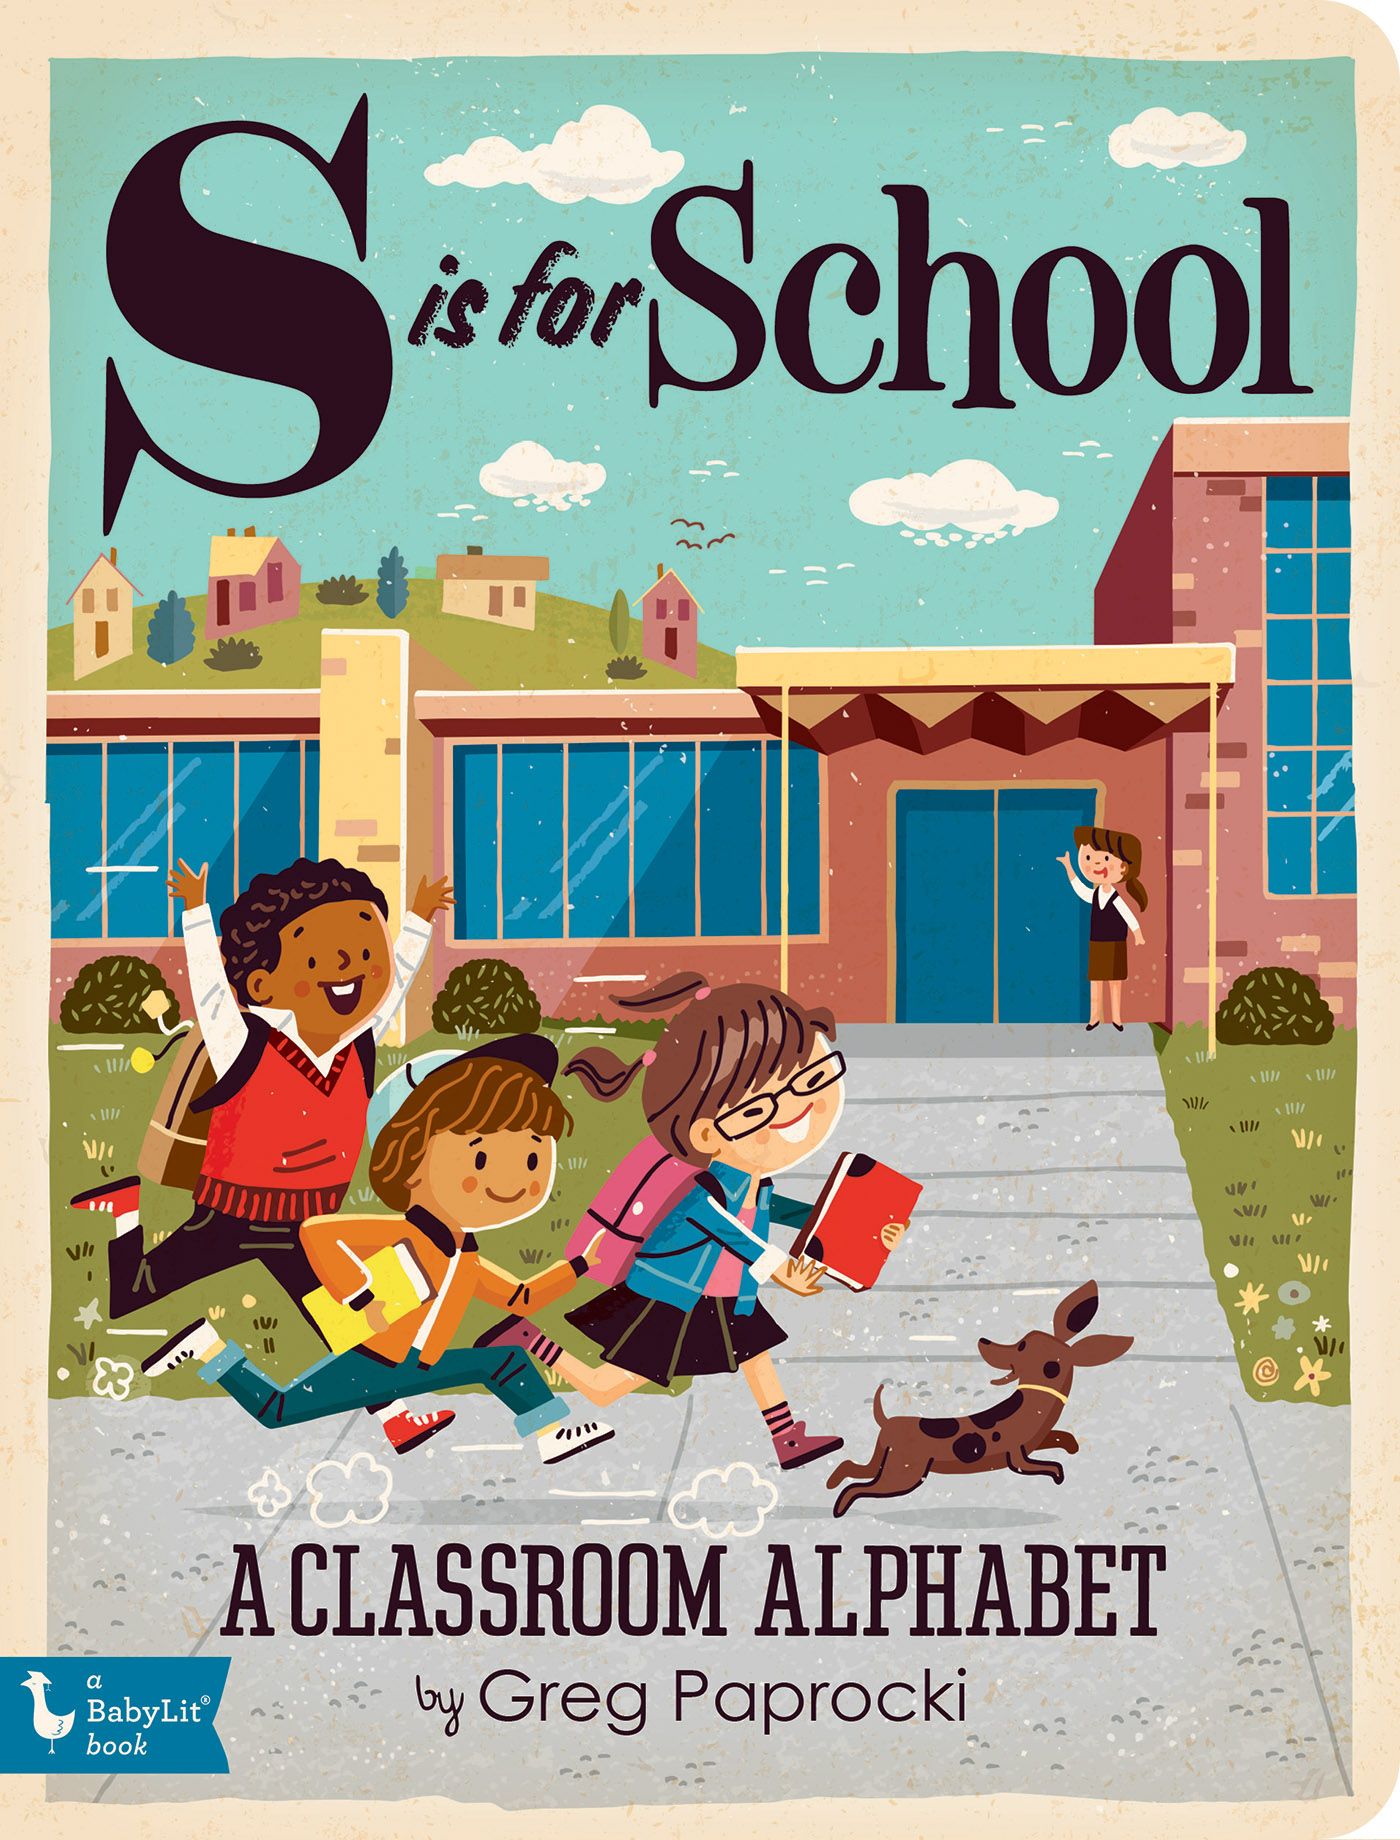 S is for School - A Classroom Alphabet